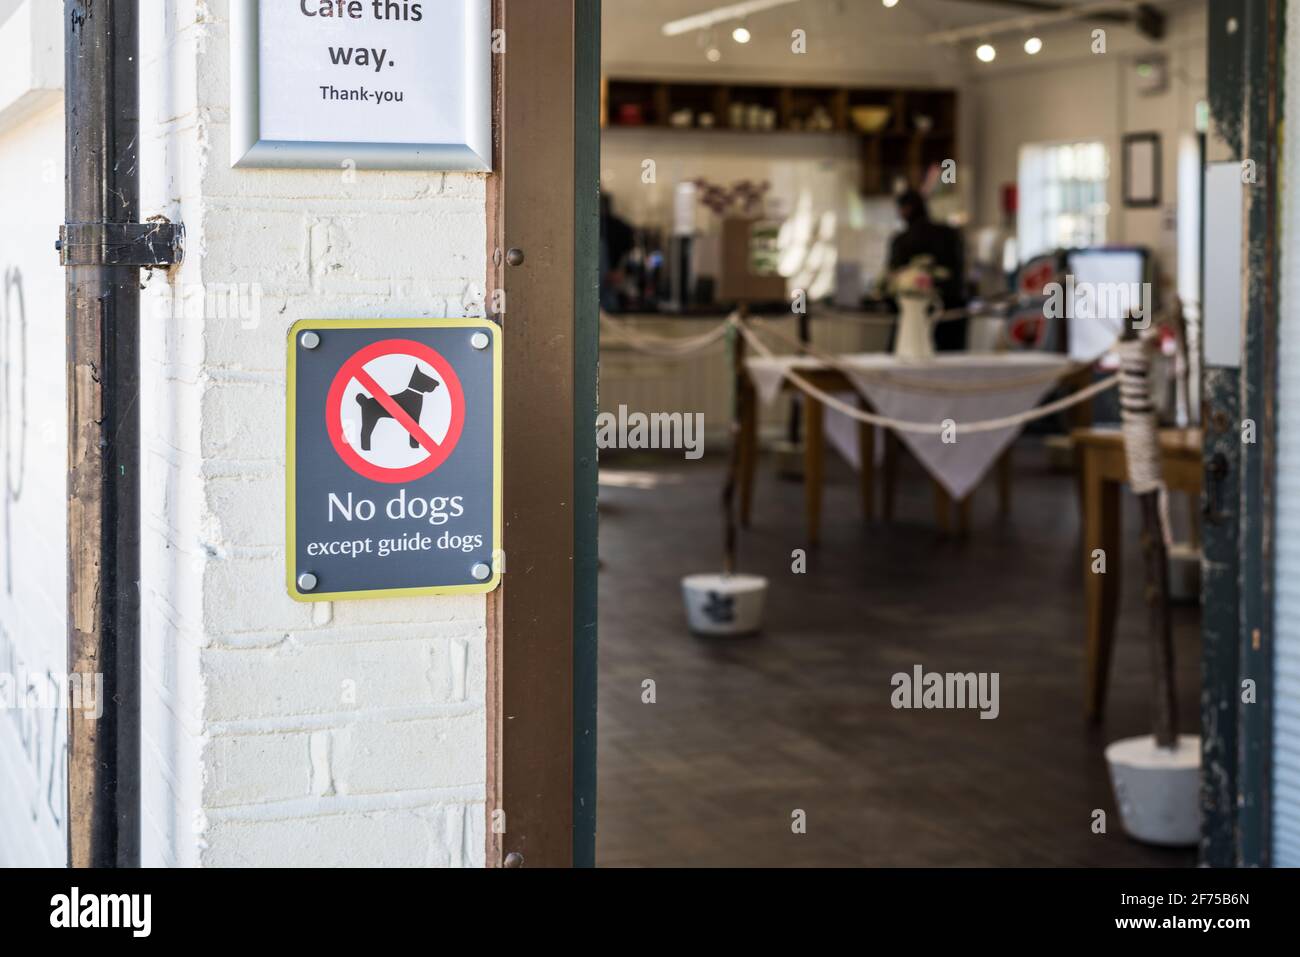 No dogs except guide dogs visual sign board at the entrance of cafe Stock Photo